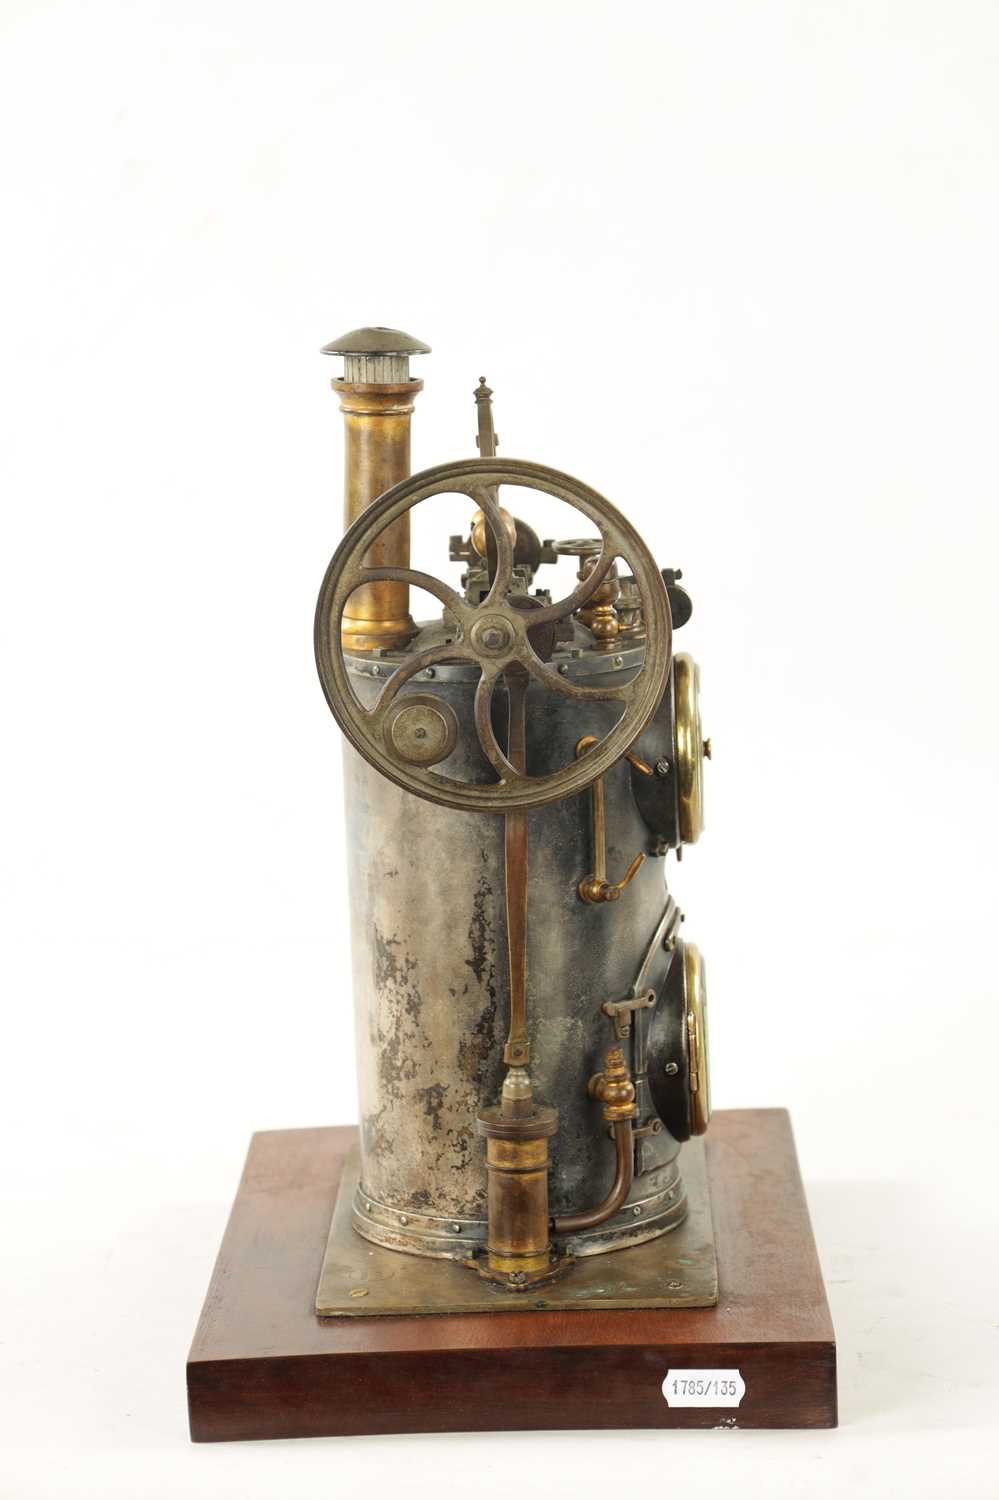 A RARE LATE 19TH CENTURY FRENCH INDUSTRIAL AUTOMATON MANTEL CLOCK - Image 8 of 8